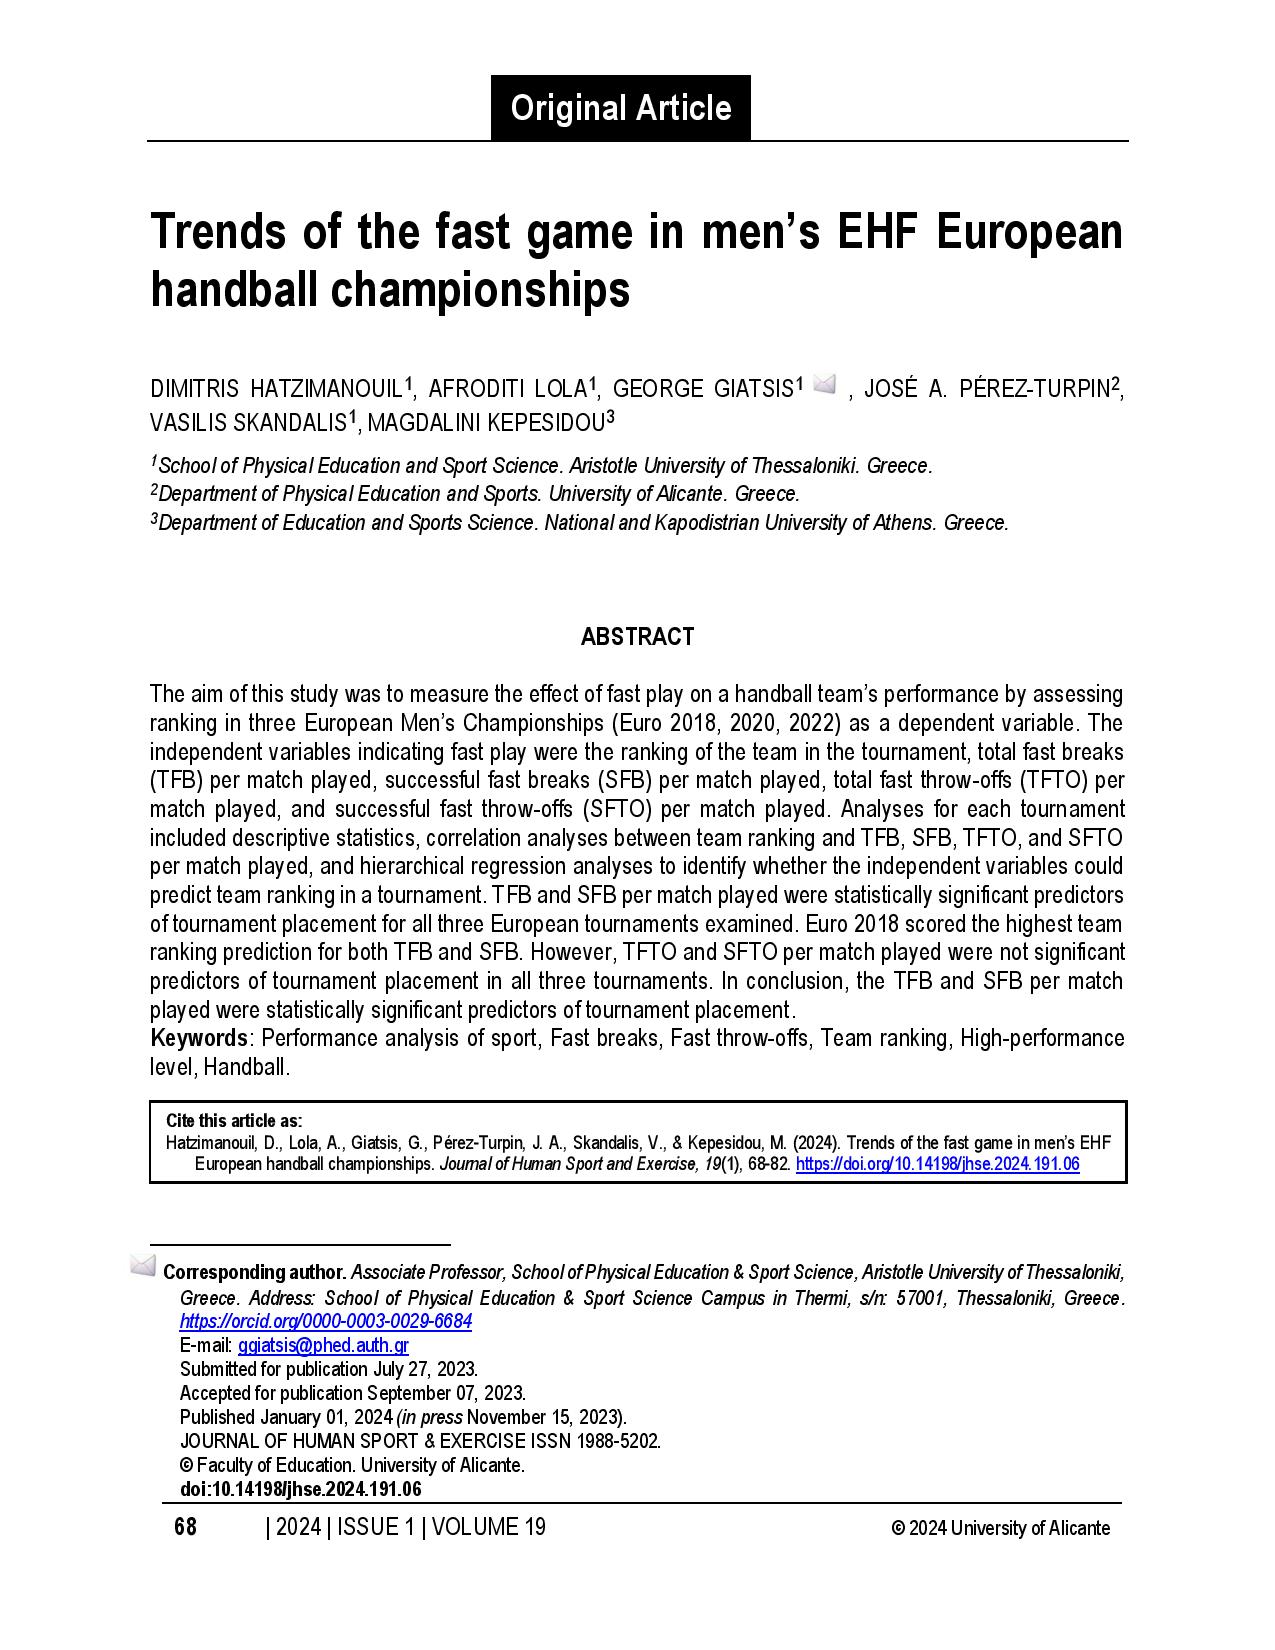 Trends of the fast game in men’s EHF European handball championships